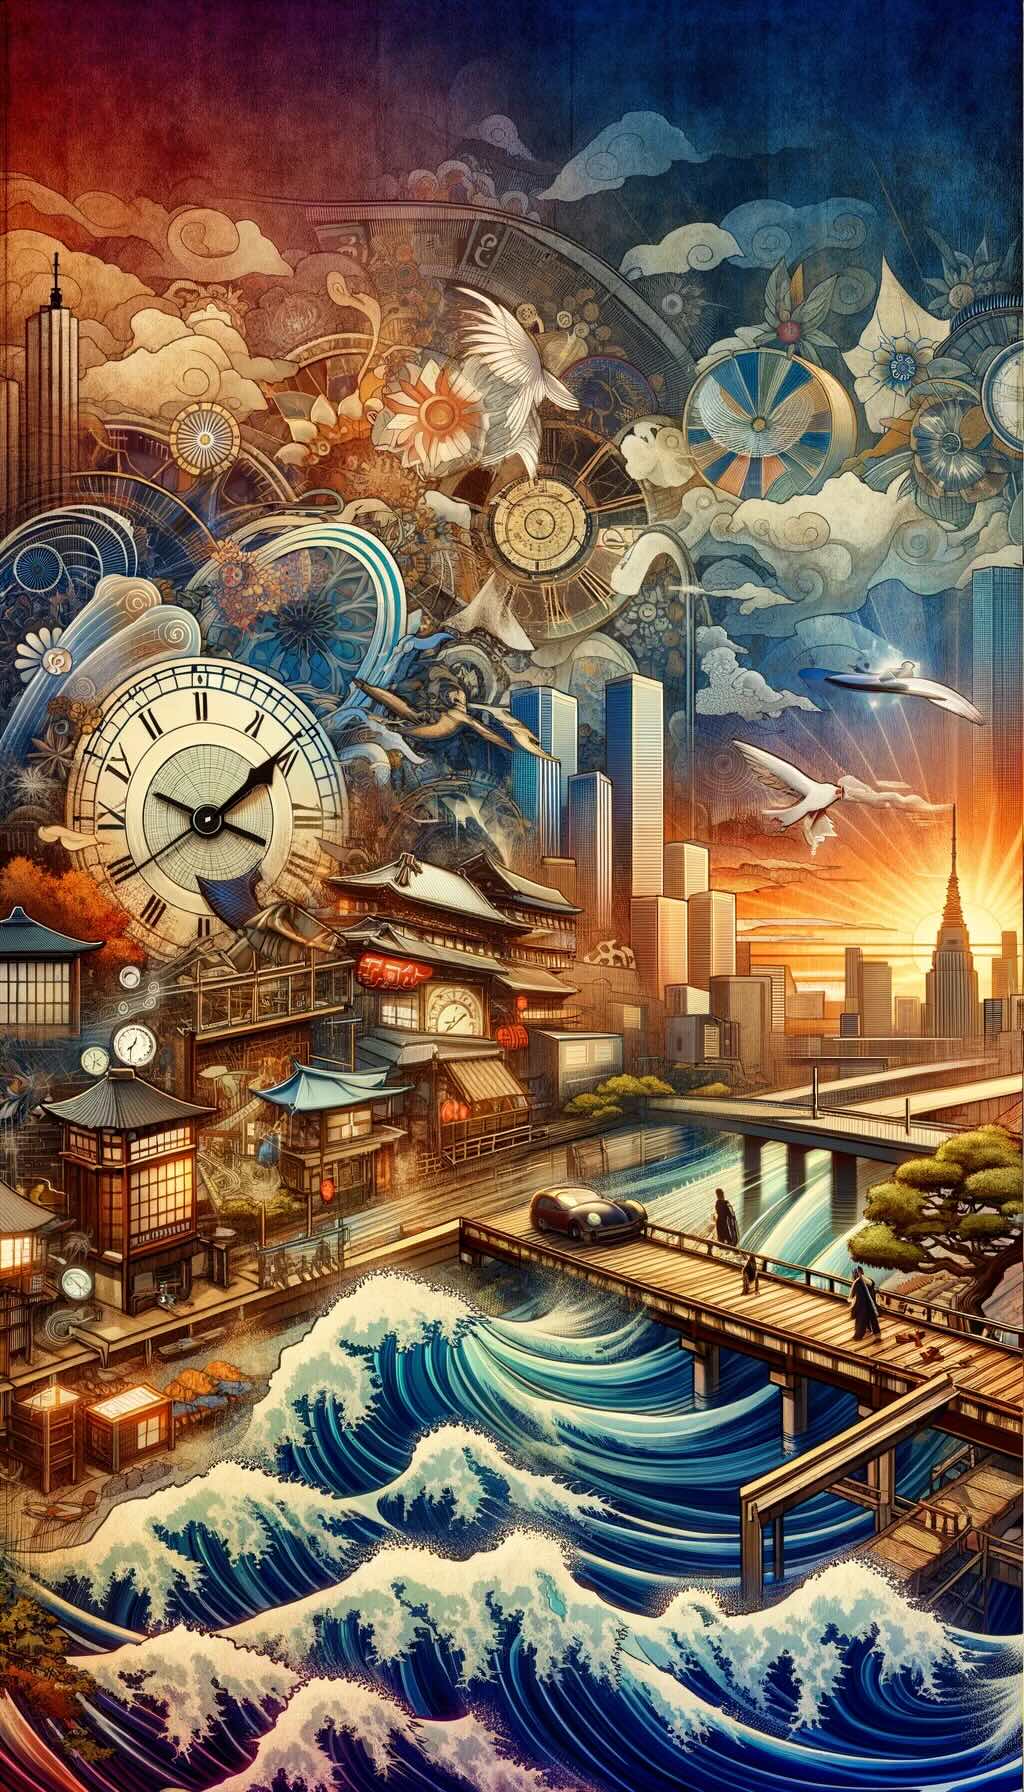 Concept of 'Embracing the Journey Through Japan Standard Time' depicts a blend of modernity and traditional elegance, symbolizing a journey through time in Japan. It includes visual elements that represent the passage of time in Japanese culture, such as clocks set to JST, scenes of daily life from morning to night, and iconic Japanese landmarks. The image conveys the idea of exploring the rich cultural tapestry of Japan, with each moment intricately tied to Japan Standard Time, in a fusion of contemporary and traditional Japanese art styles